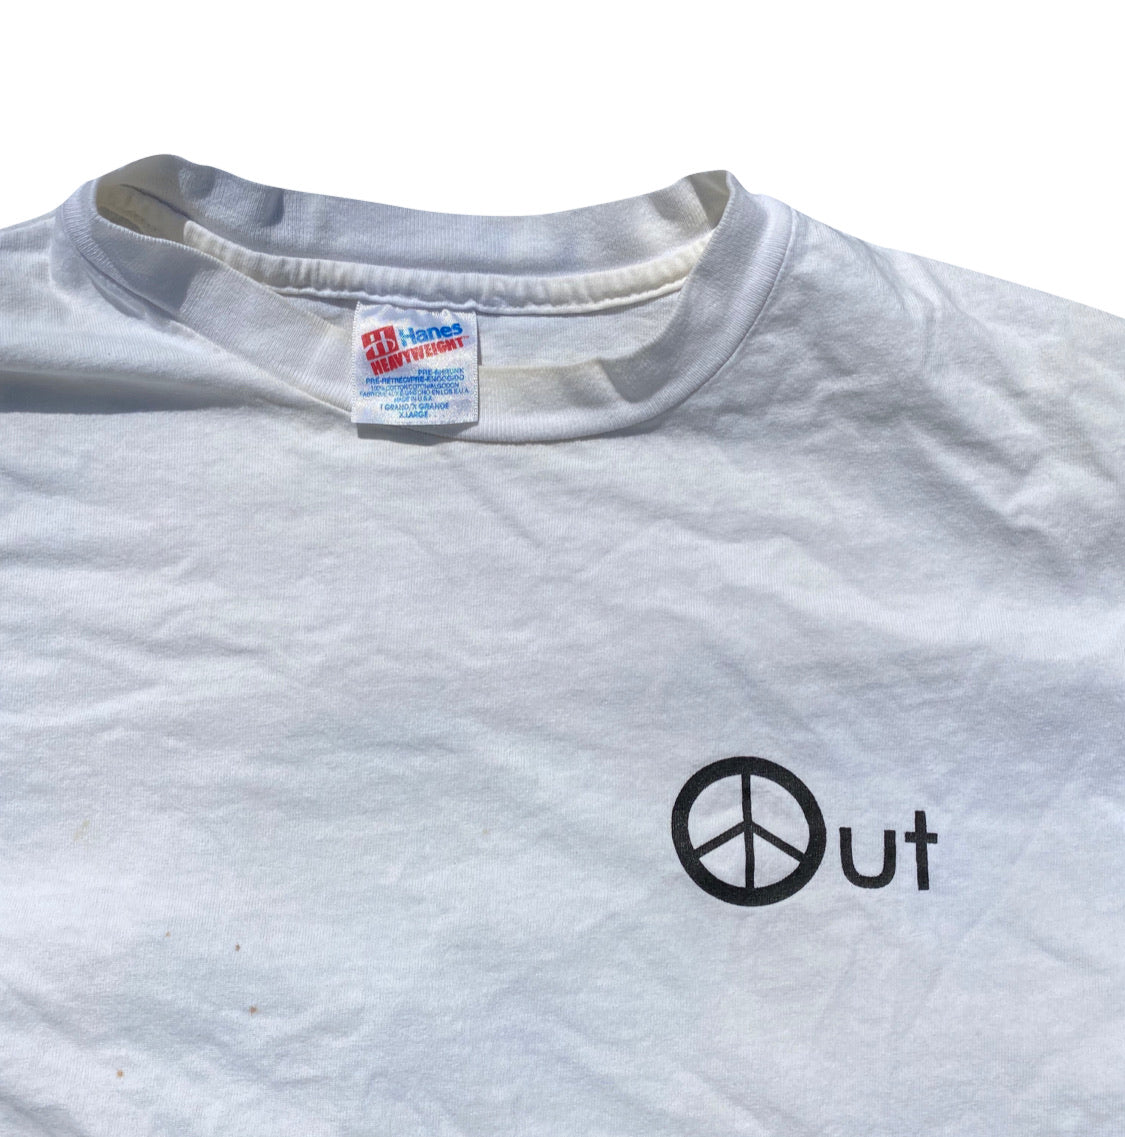 90s Peace out tee. XL